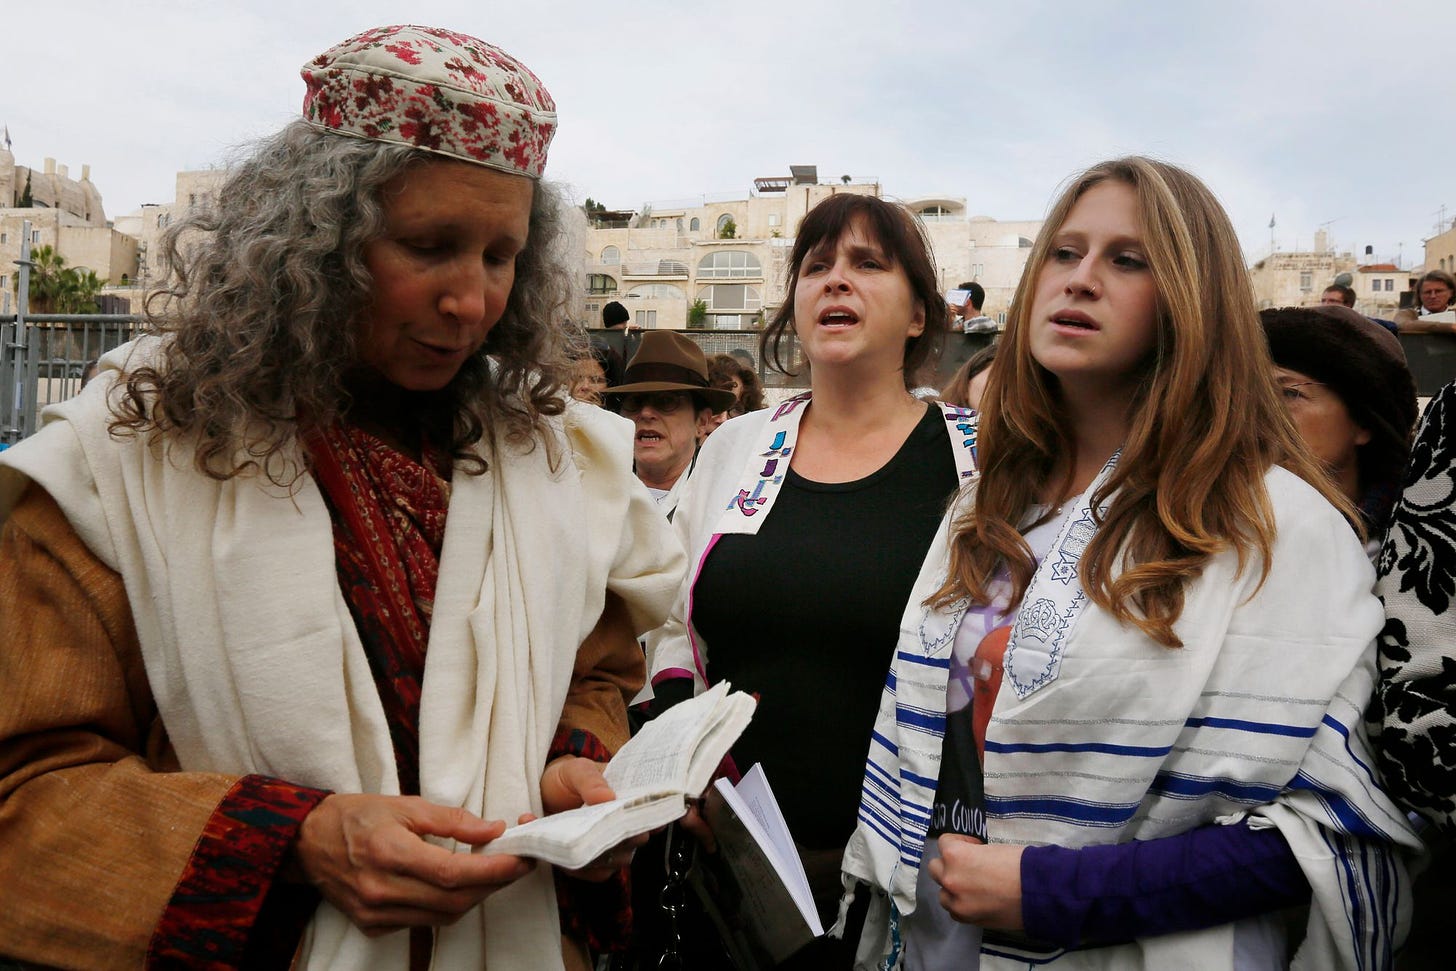 Rabbi Susan Silverman (C) and her daughter Hallel (R), seen wearing a prayer shawl as they pray together with women of the "Women of the Wall" organization at the Western Wall, Judaism's holiest site, in Jerusalem on April 11, 2013. Photo by Miriam Alster/FLASH90)